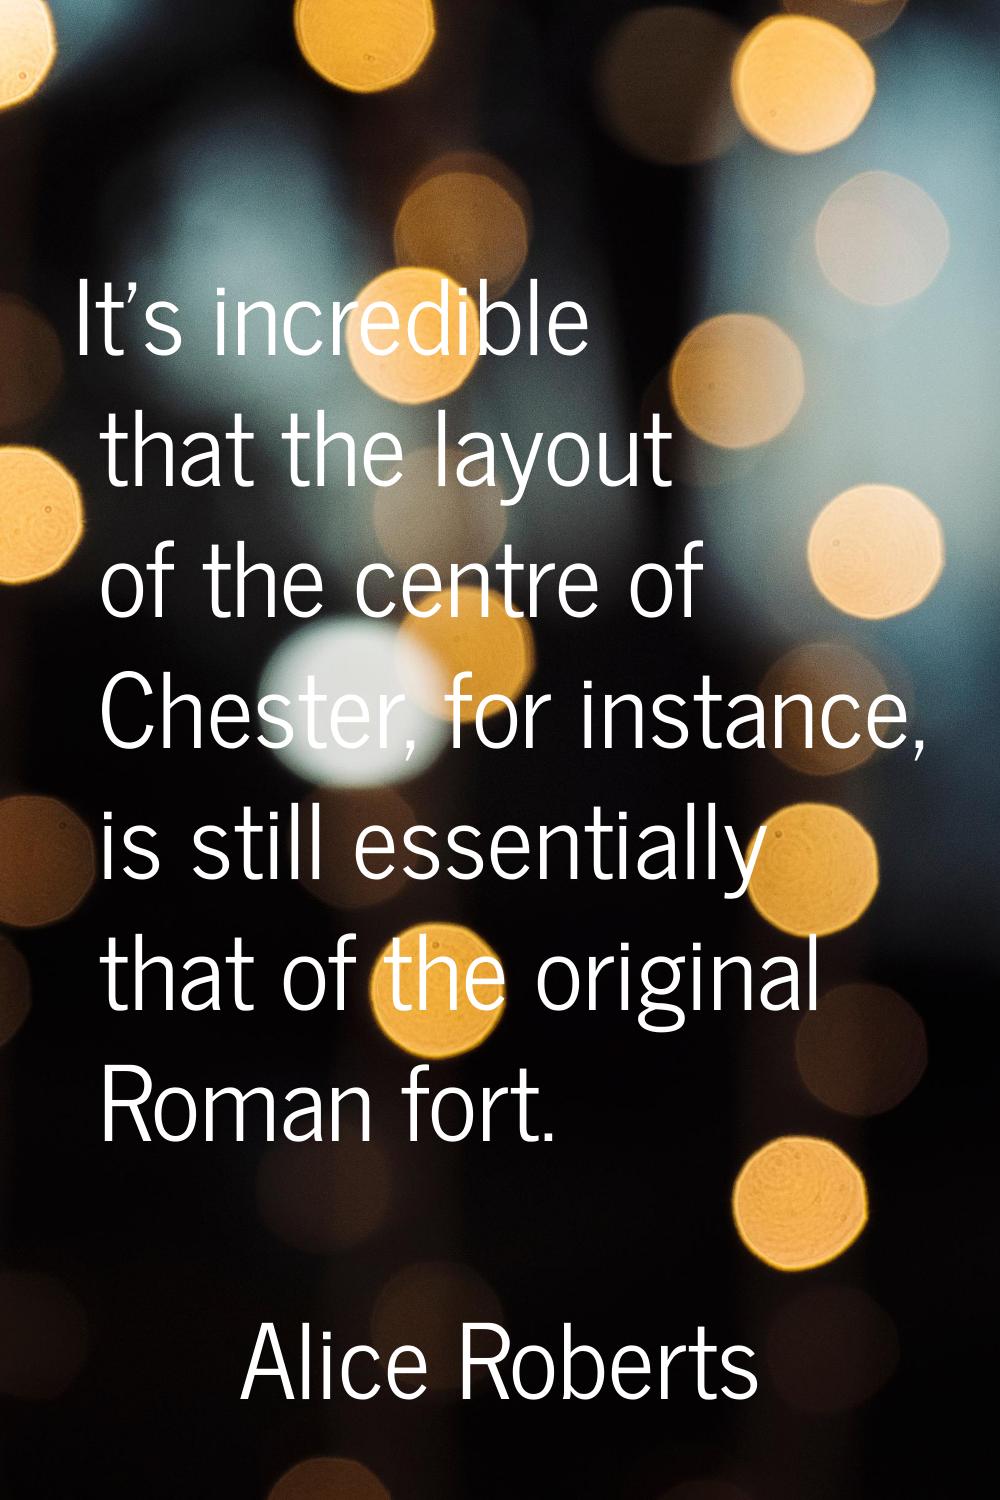 It’s incredible that the layout of the centre of Chester, for instance, is still essentially that o